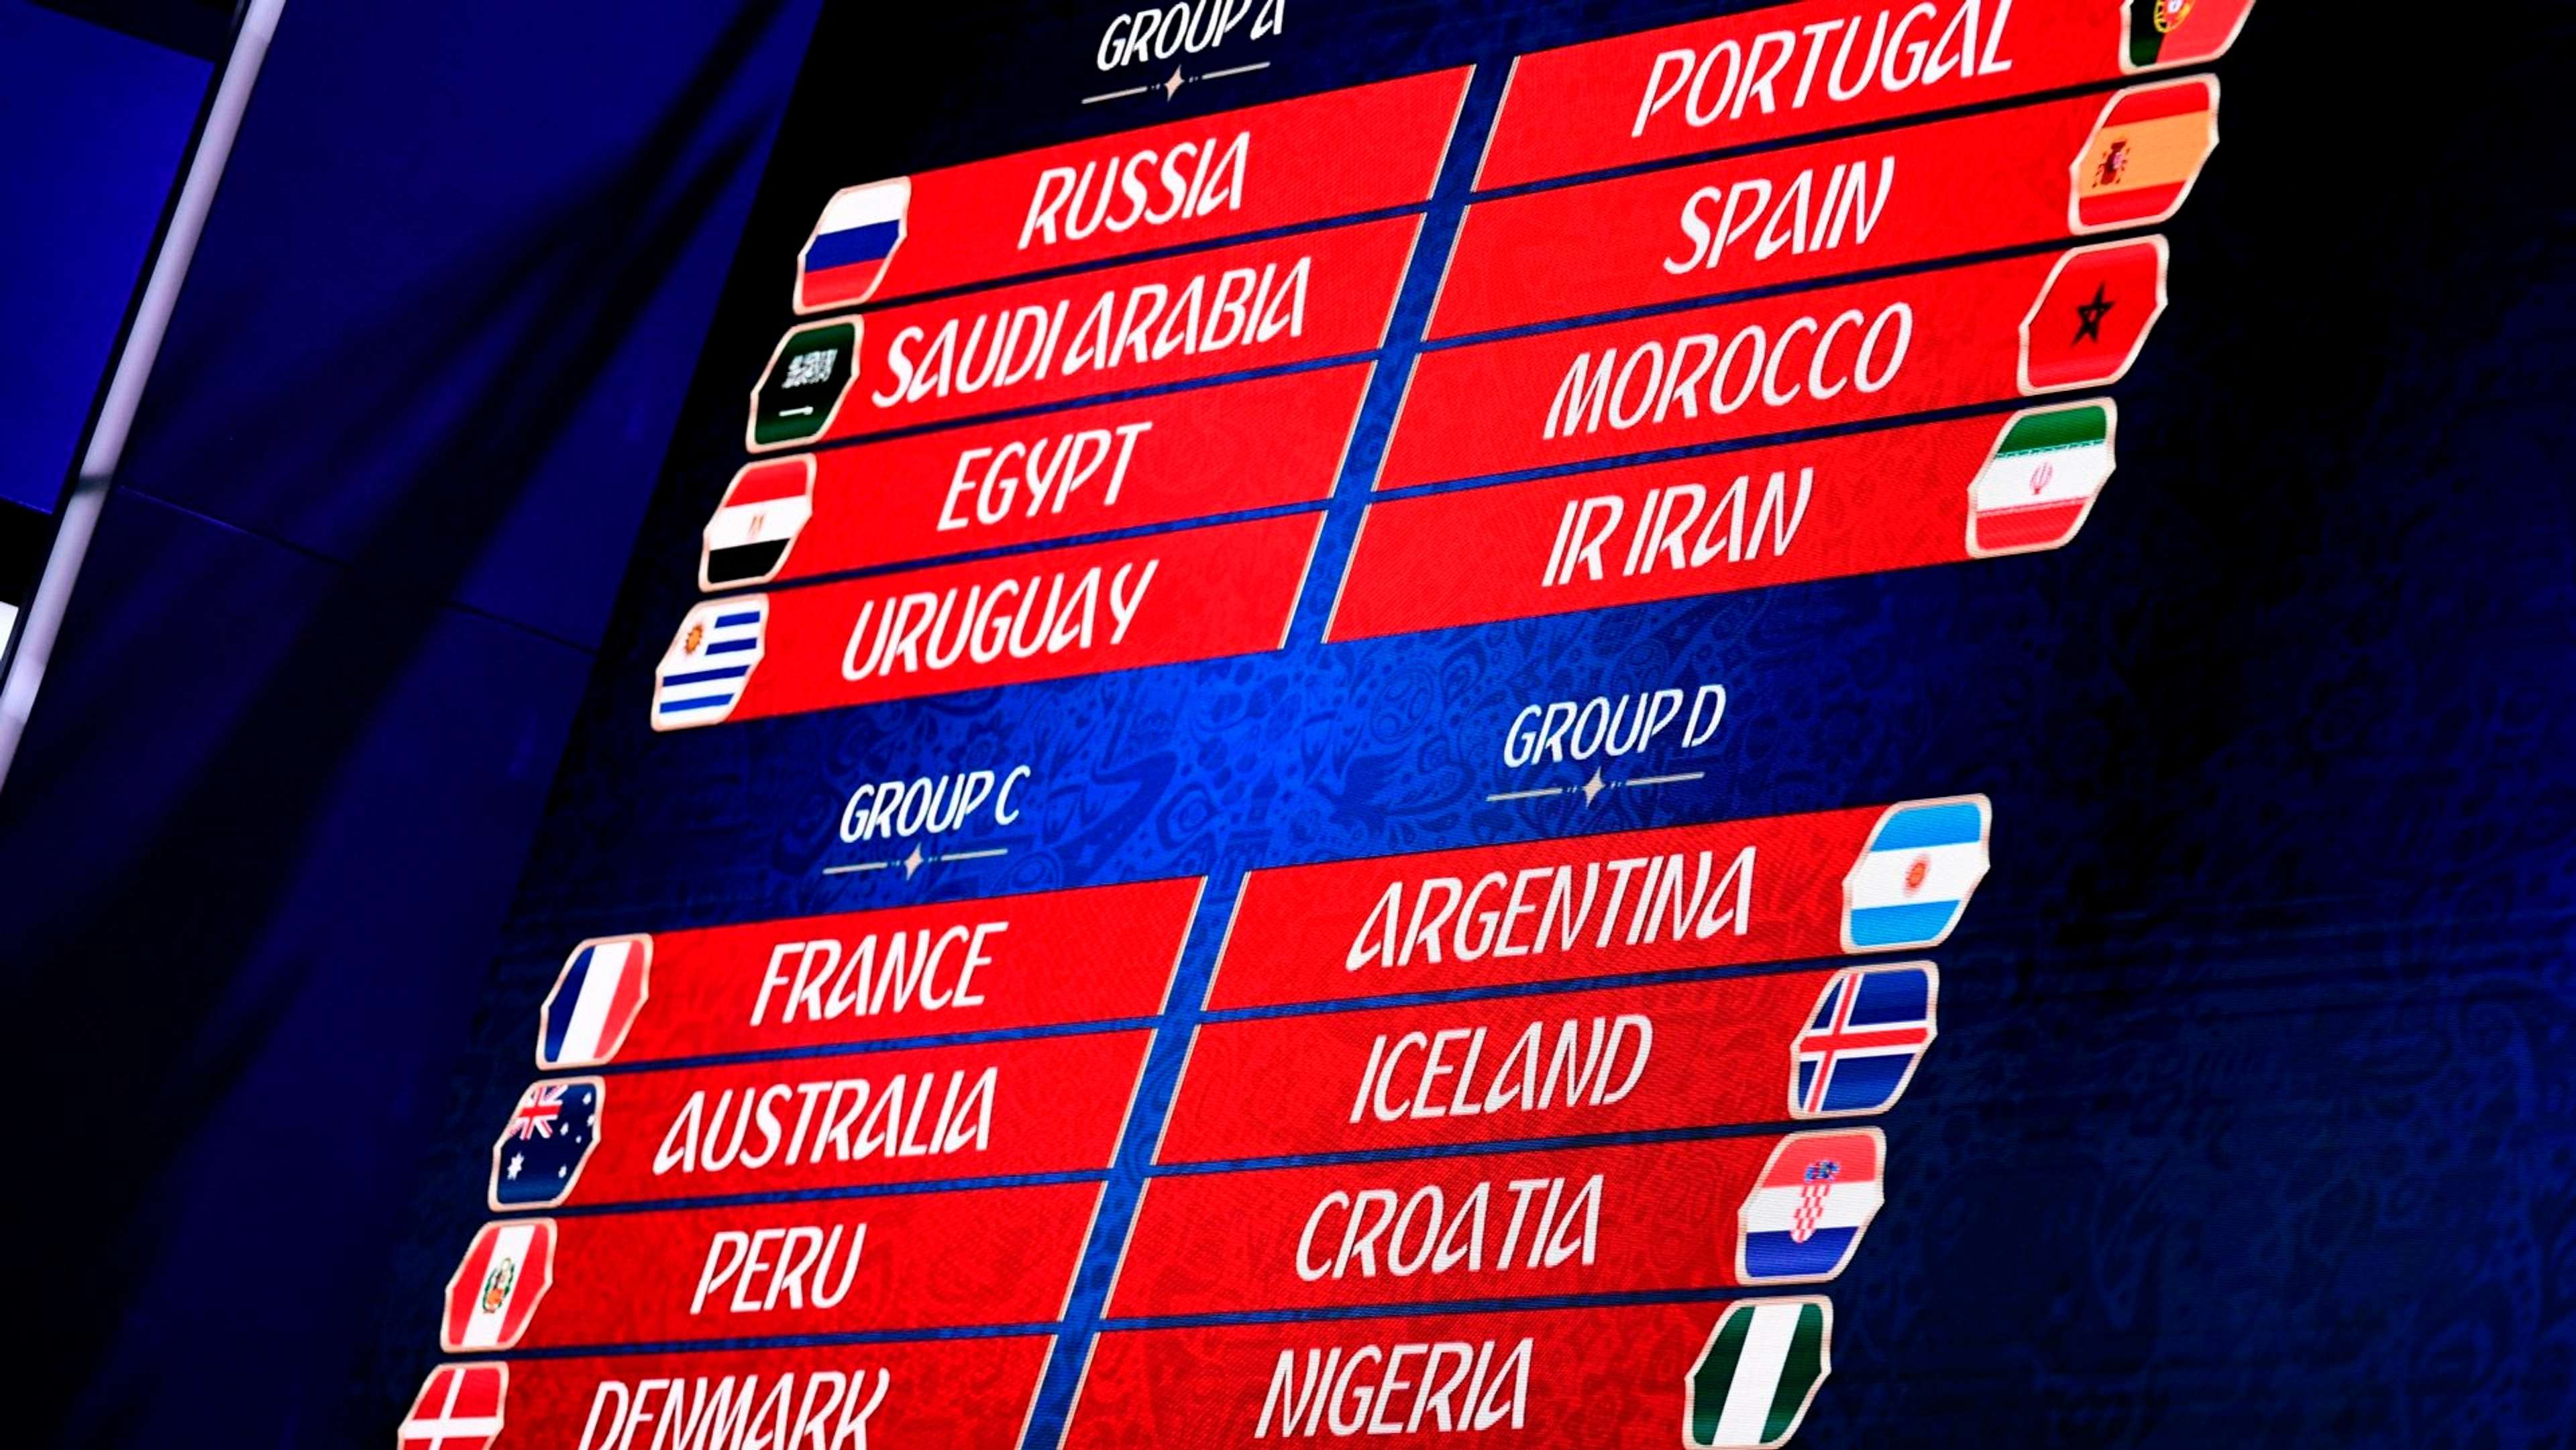 Group FIFA World Cup 2018 draw